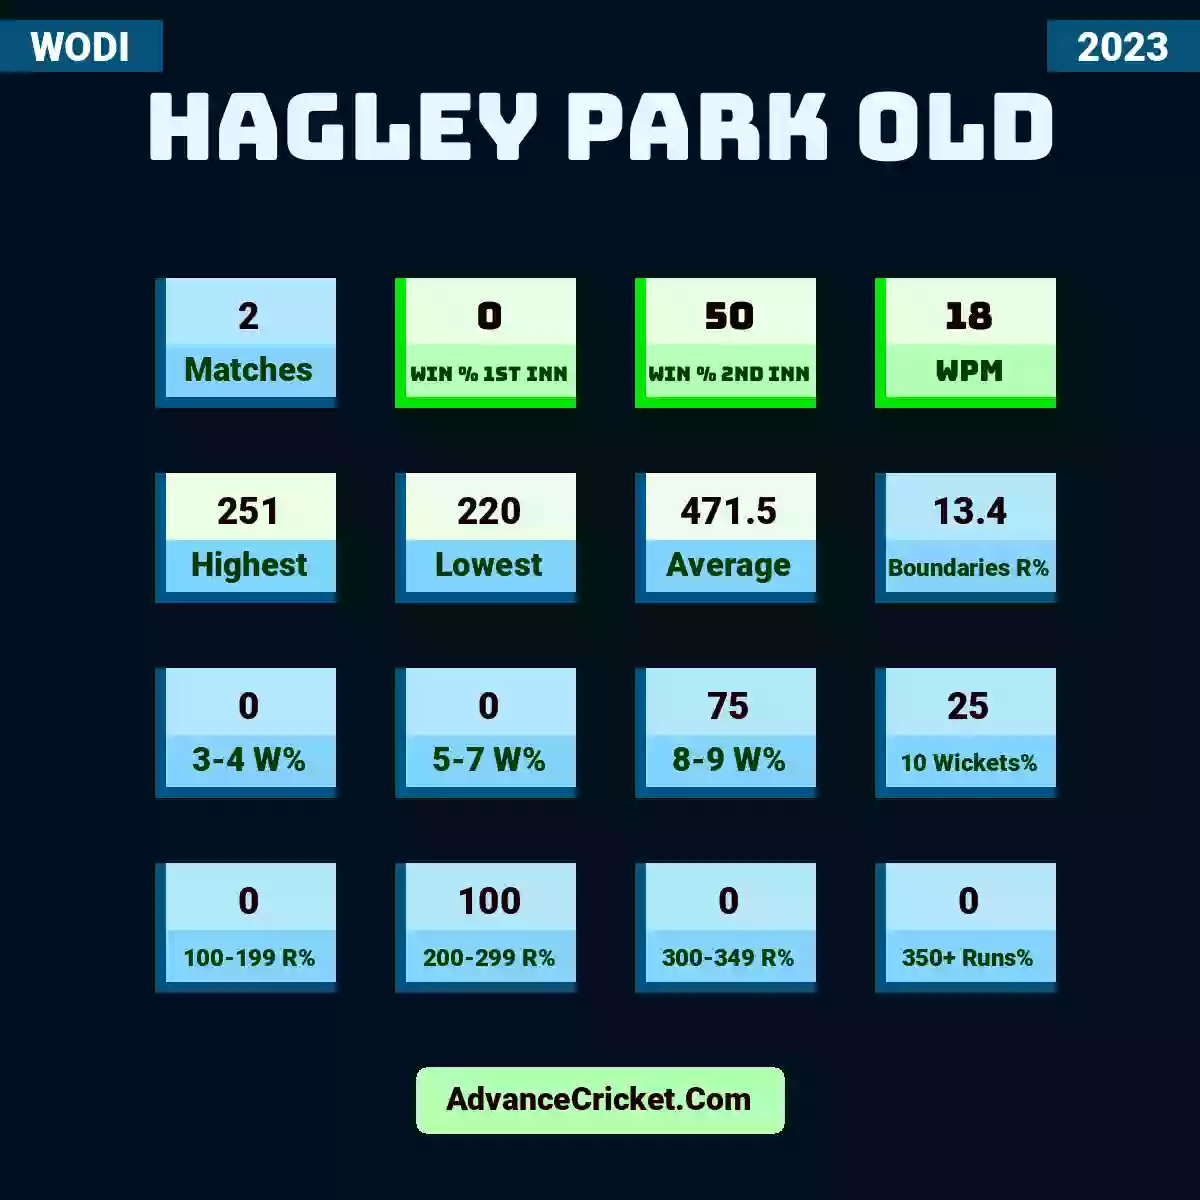 Image showing Hagley Park Old with Matches: 2, Win % 1st Inn: 0, Win % 2nd Inn: 50, WPM: 18, Highest: 251, Lowest: 220, Average: 471.5, Boundaries R%: 13.4, 3-4 W%: 0, 5-7 W%: 0, 8-9 W%: 75, 10 Wickets%: 25, 100-199 R%: 0, 200-299 R%: 100, 300-349 R%: 0, 350+ Runs%: 0.